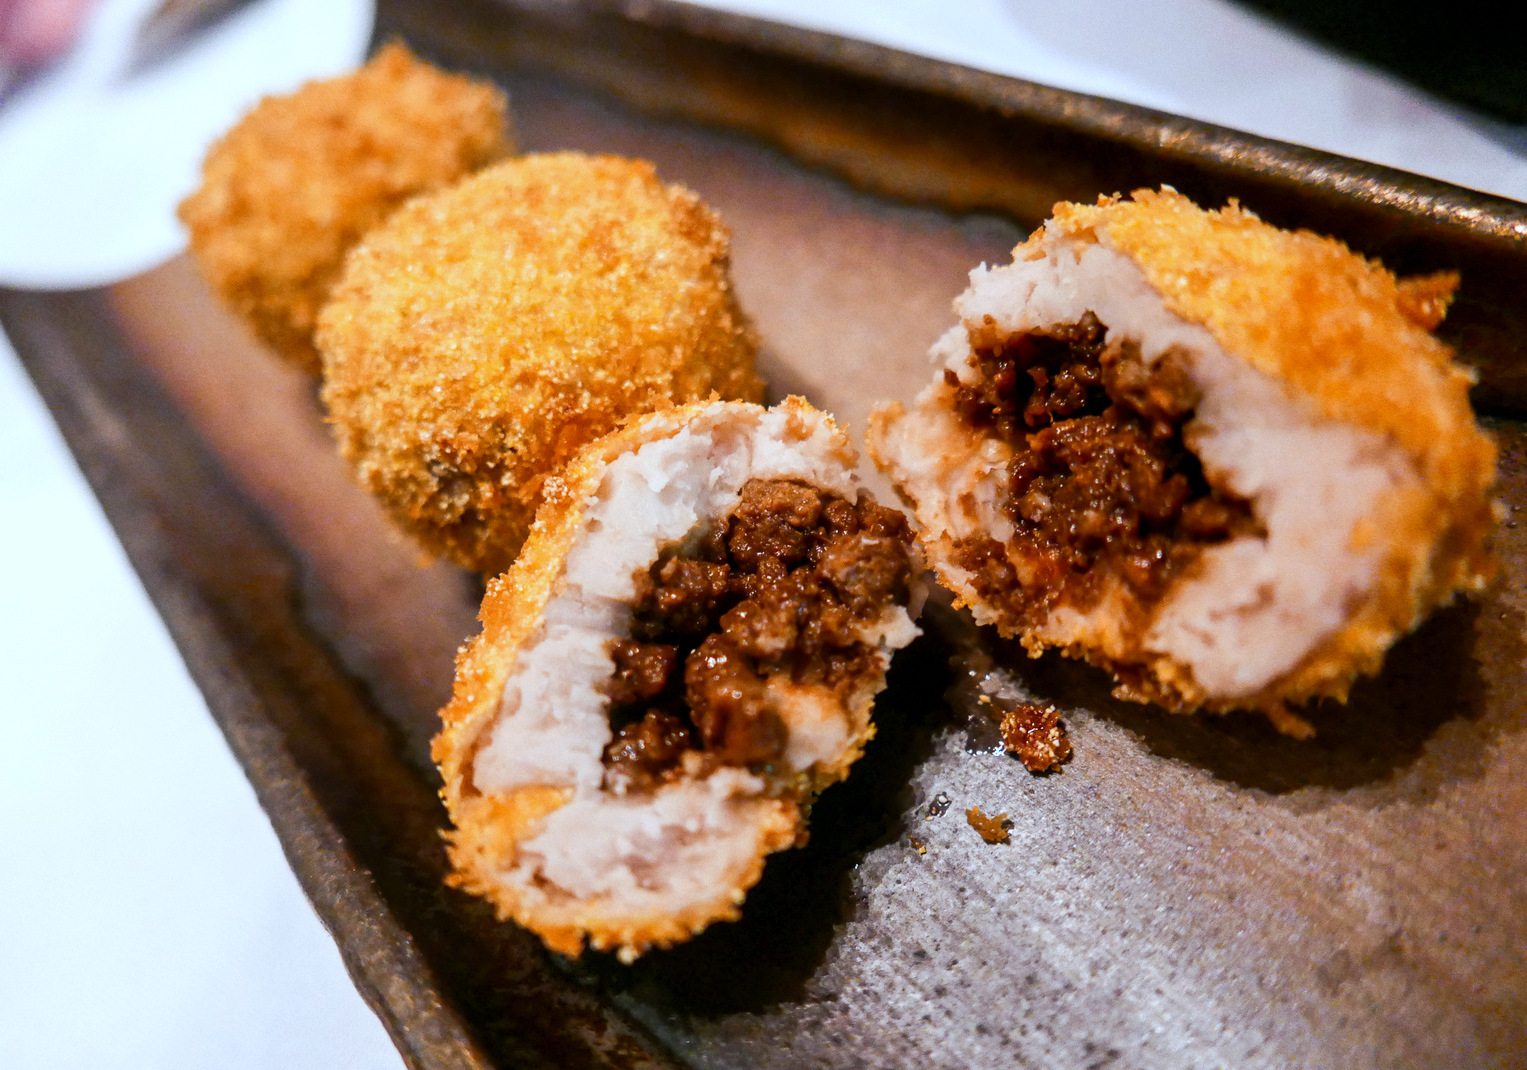 11. yam croquettes stuffed with char siew